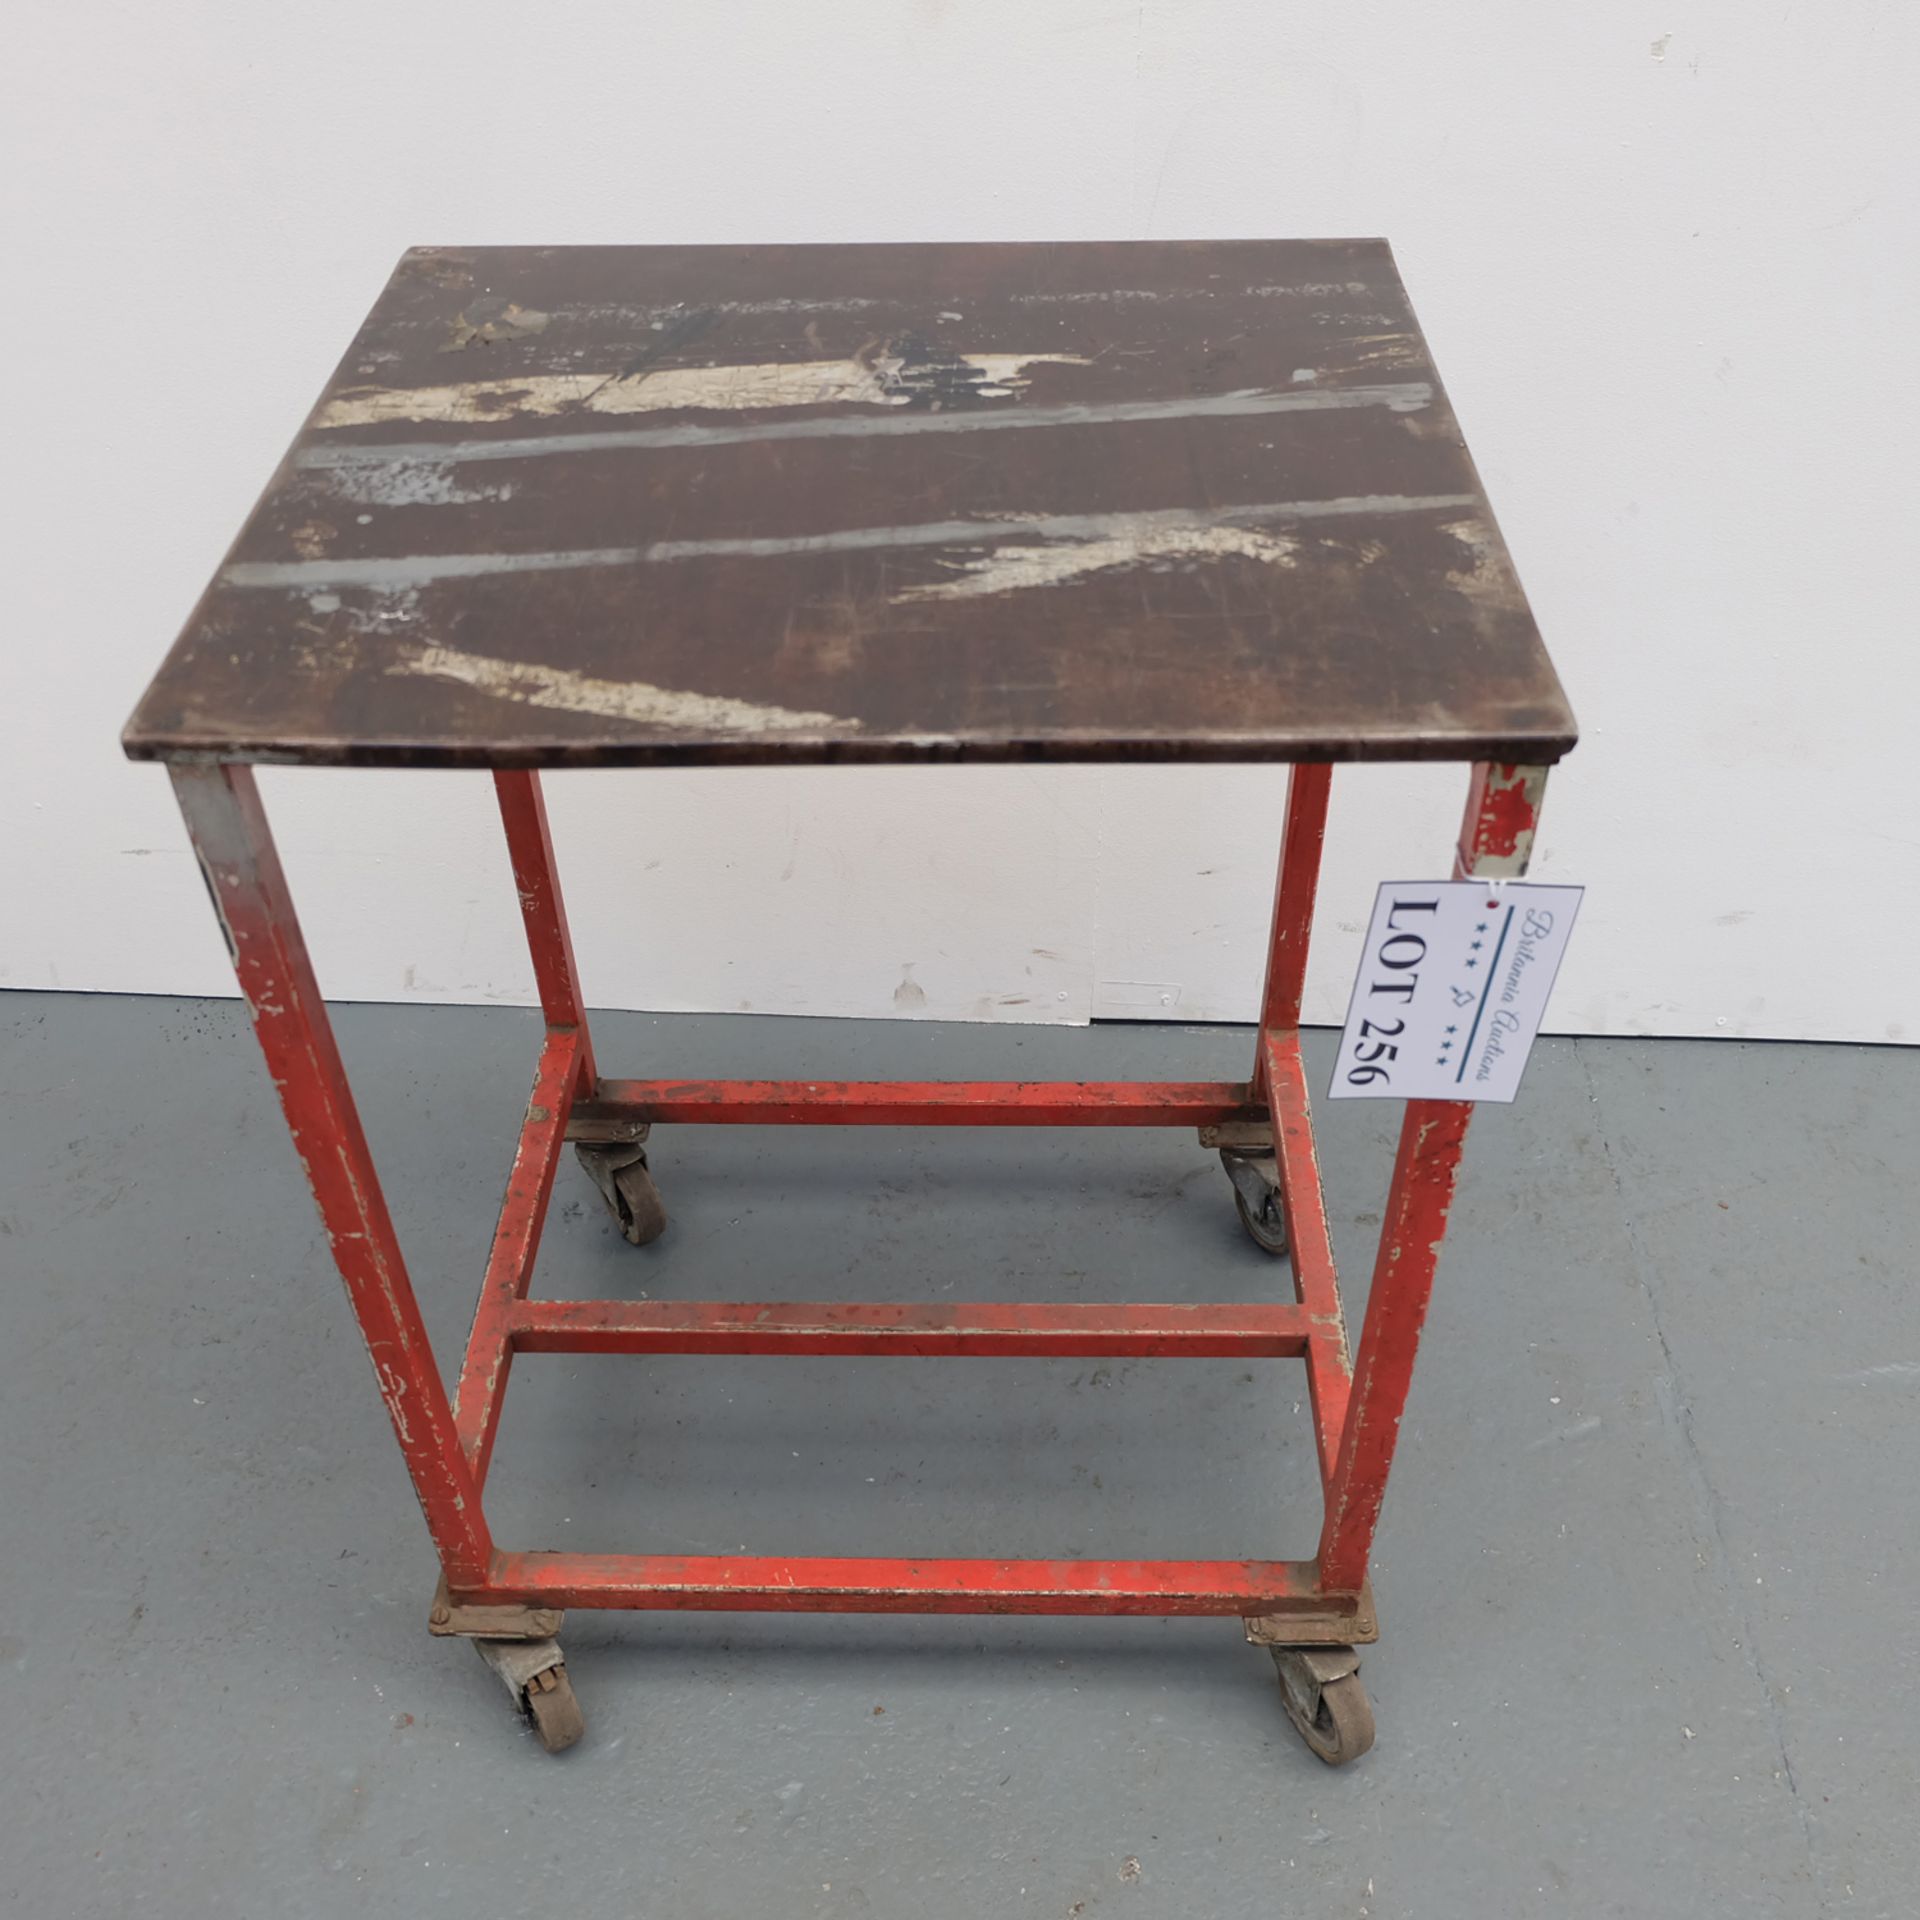 Mobile Steel Trolley on Castors. Approx Dimensions 560mm x 500mm x 780mm High.